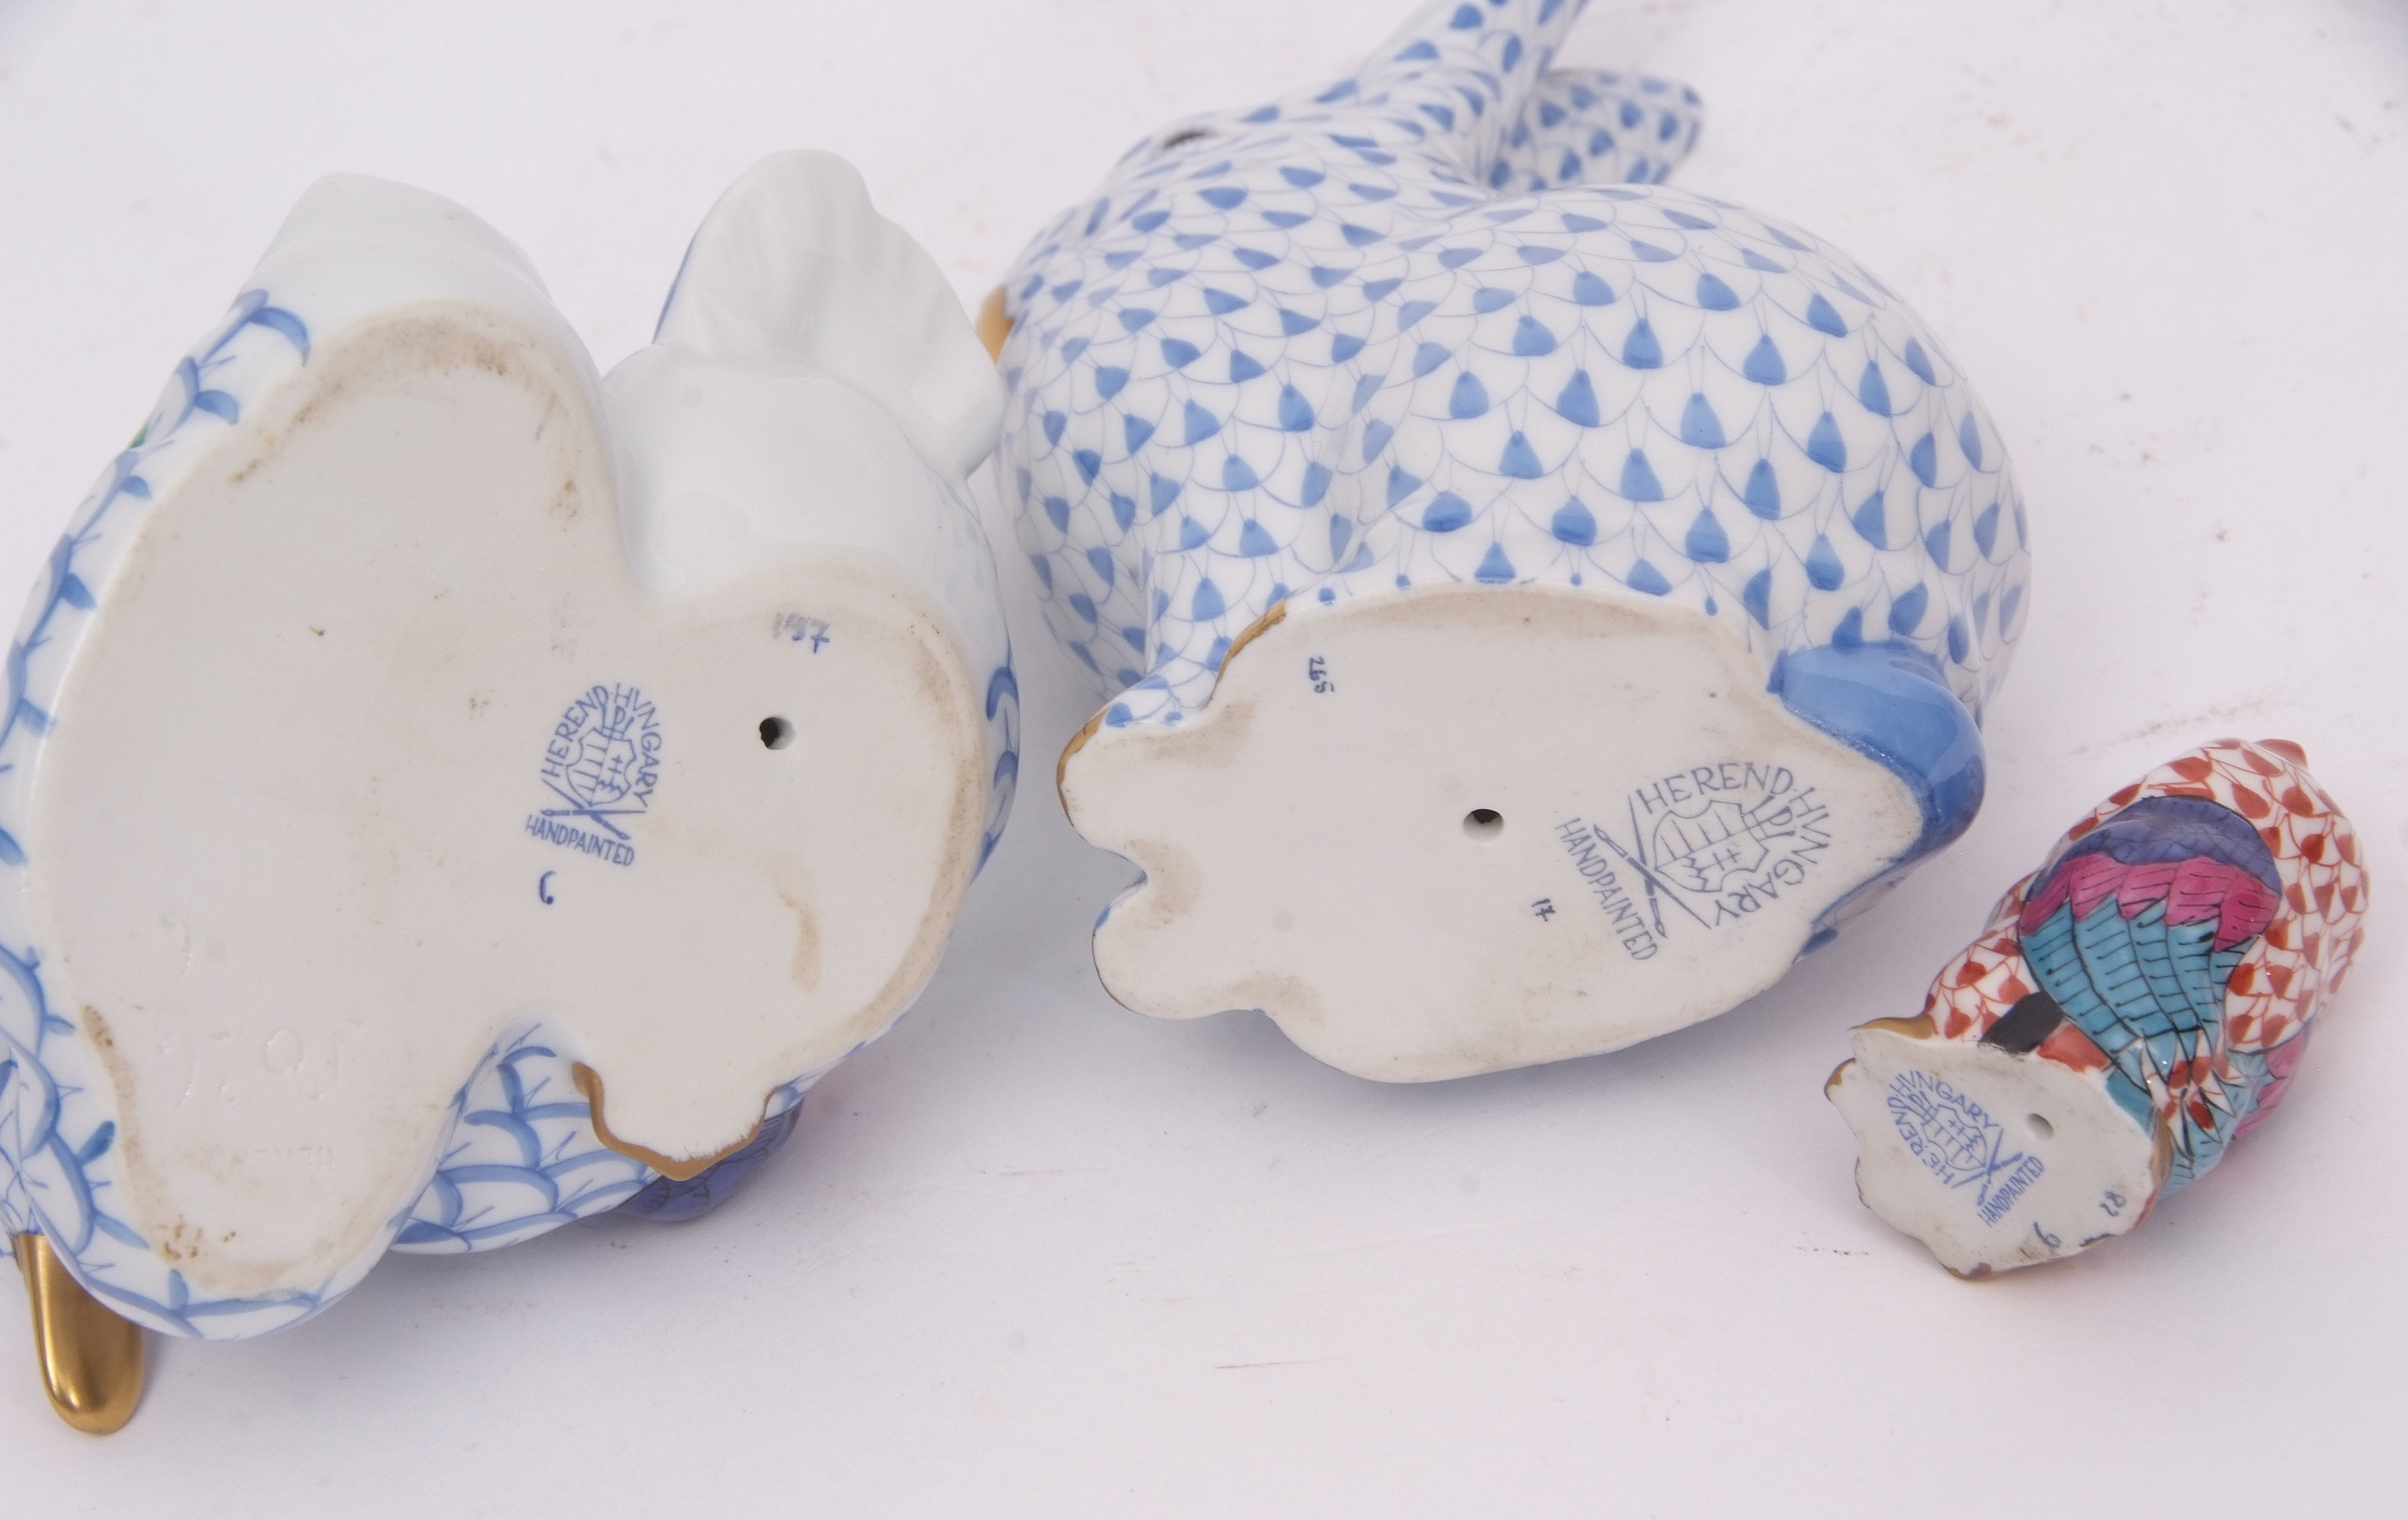 Collection of Herend porcelain models including a large rabbit, a pair of ducks and a small owl (3) - Image 3 of 3